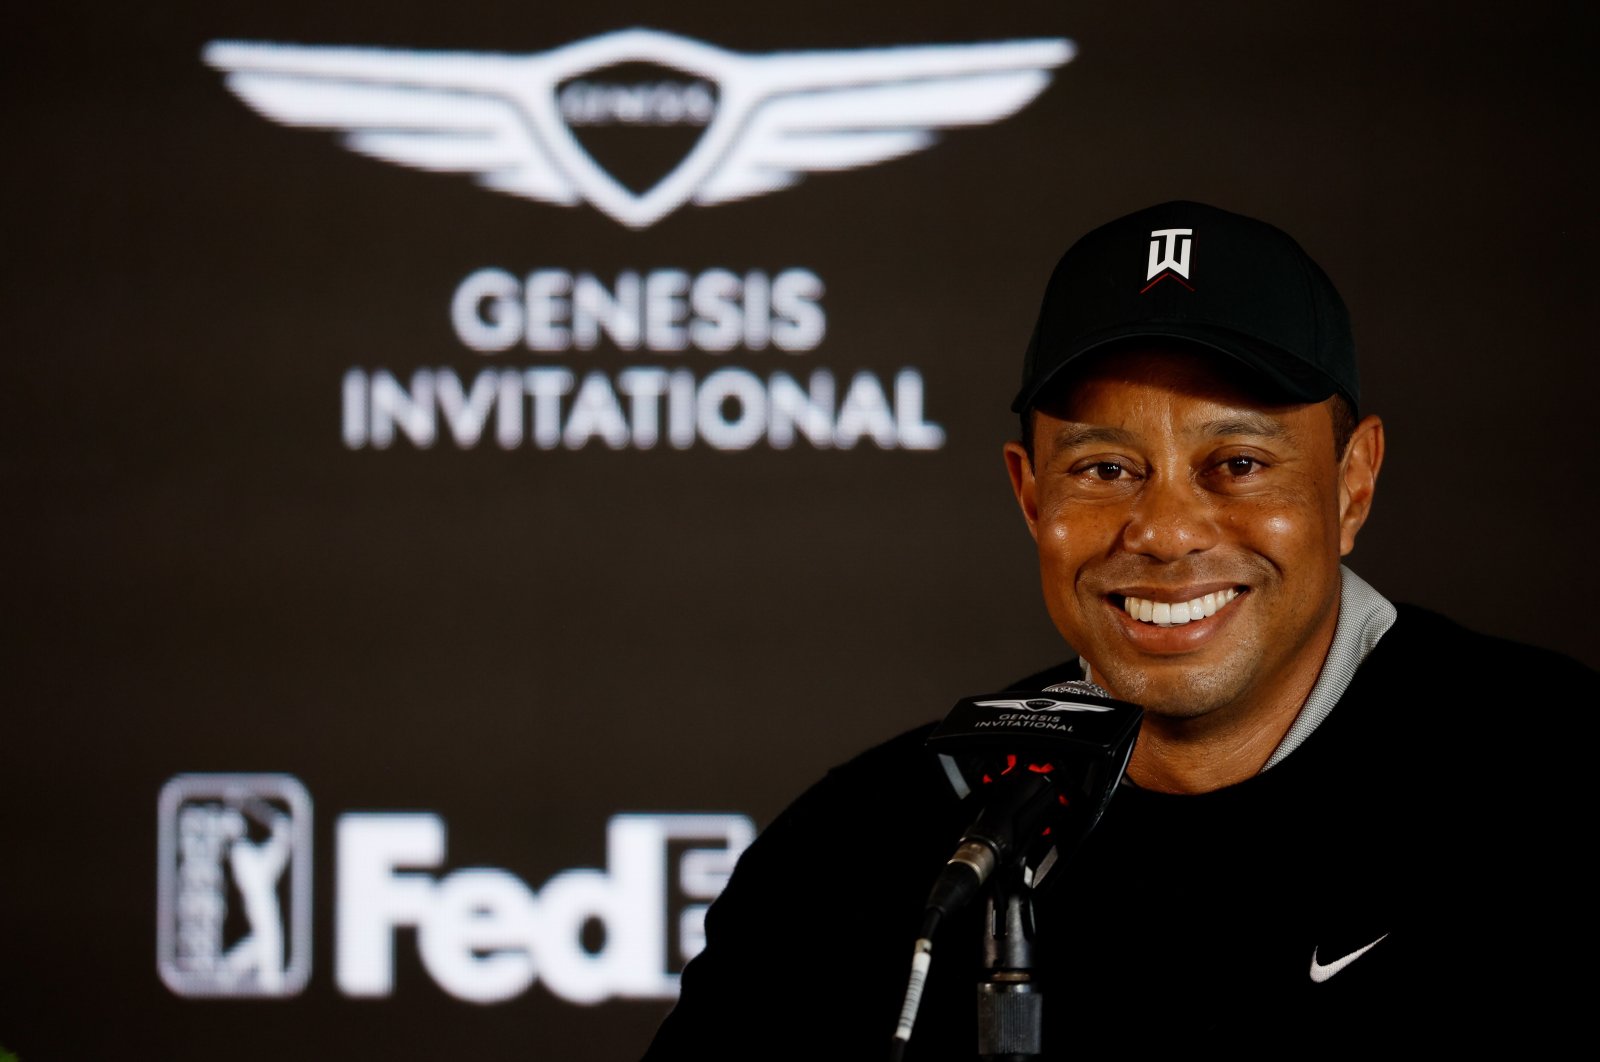 Tiger Woods speaks during a press conference prior to The Genesis Invitational, Pacific Palisades, California, U.S., Feb. 16, 2022. (AFP Photo)